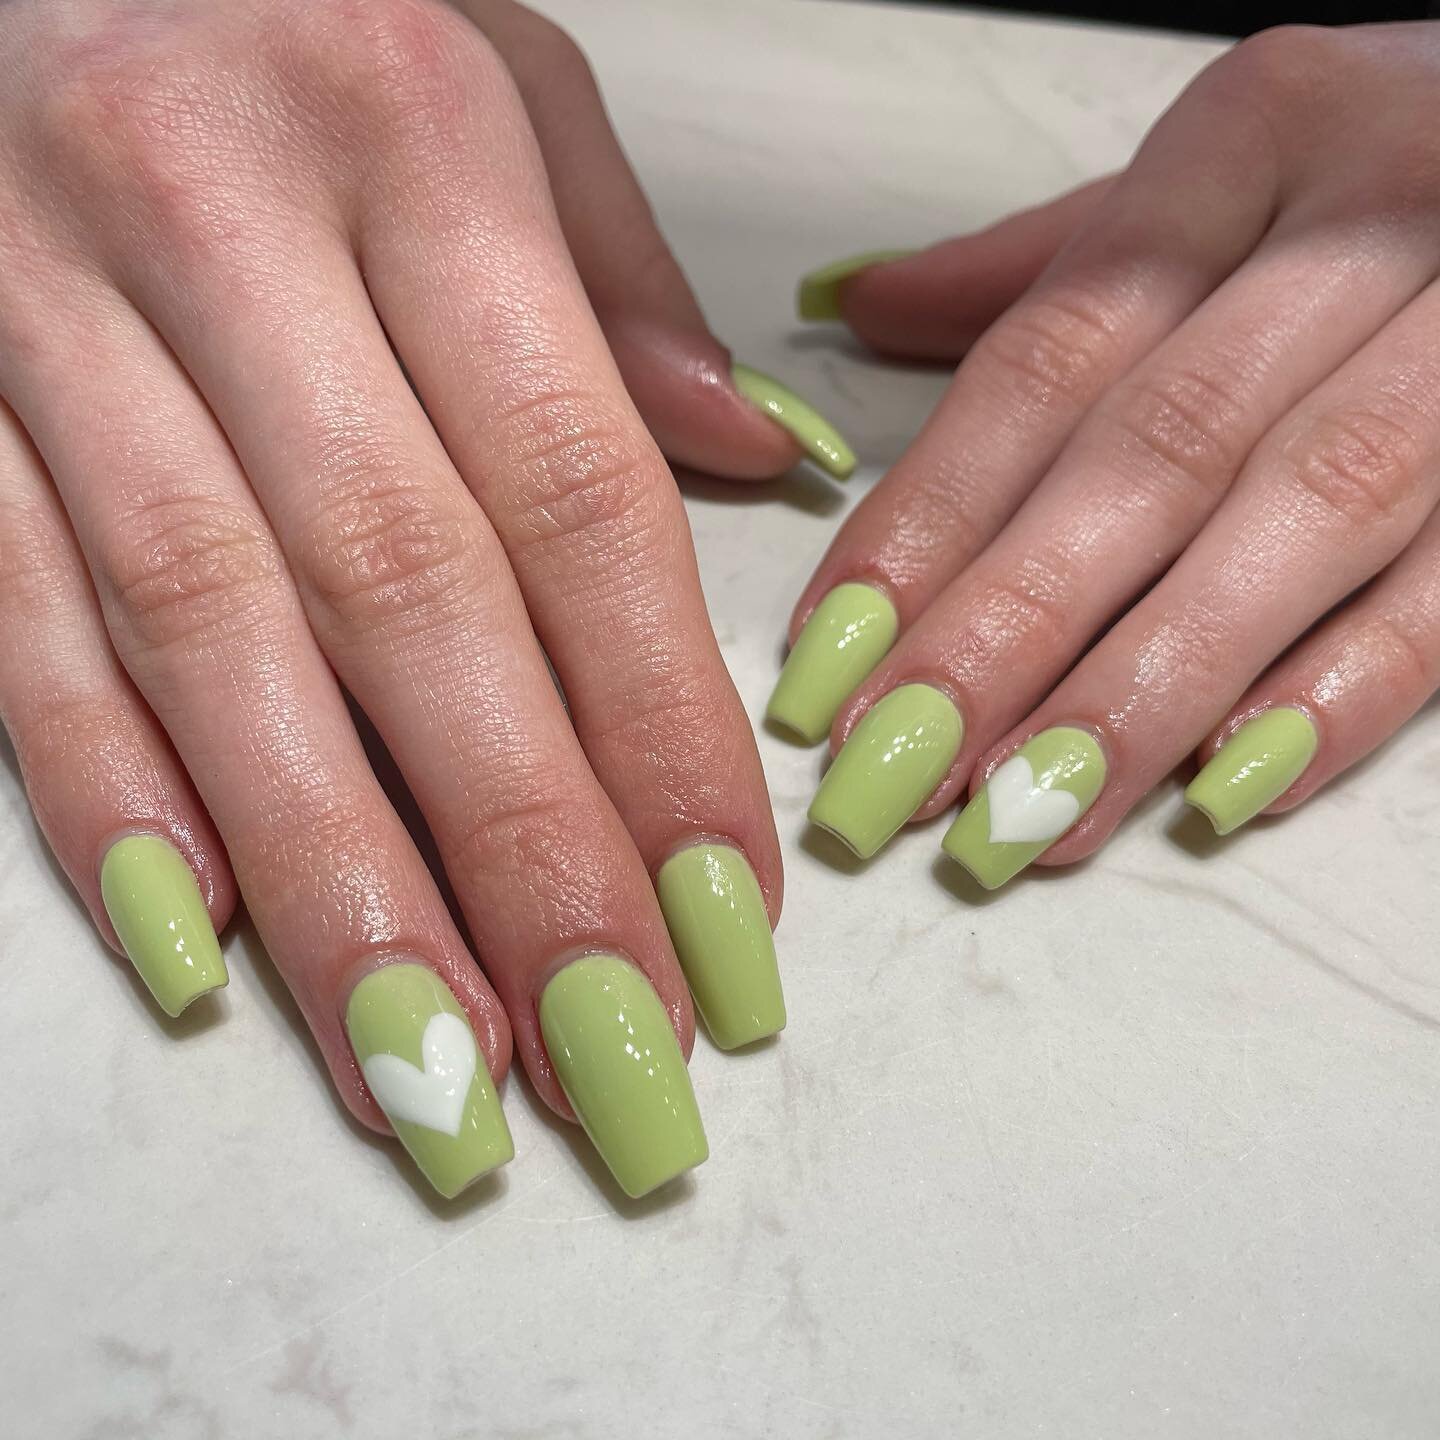 LEVEL OF COMPLEXITY: SIMPLE 2-4 NAILS. Whose ready for St. Patrick&rsquo;s day?! 🍀🍺🍻 #stpatricksnails #irish #boston #bostonsnails #bostonsnailsandspa #gelxboston #bostongelx #nailartboston #bostonnailart